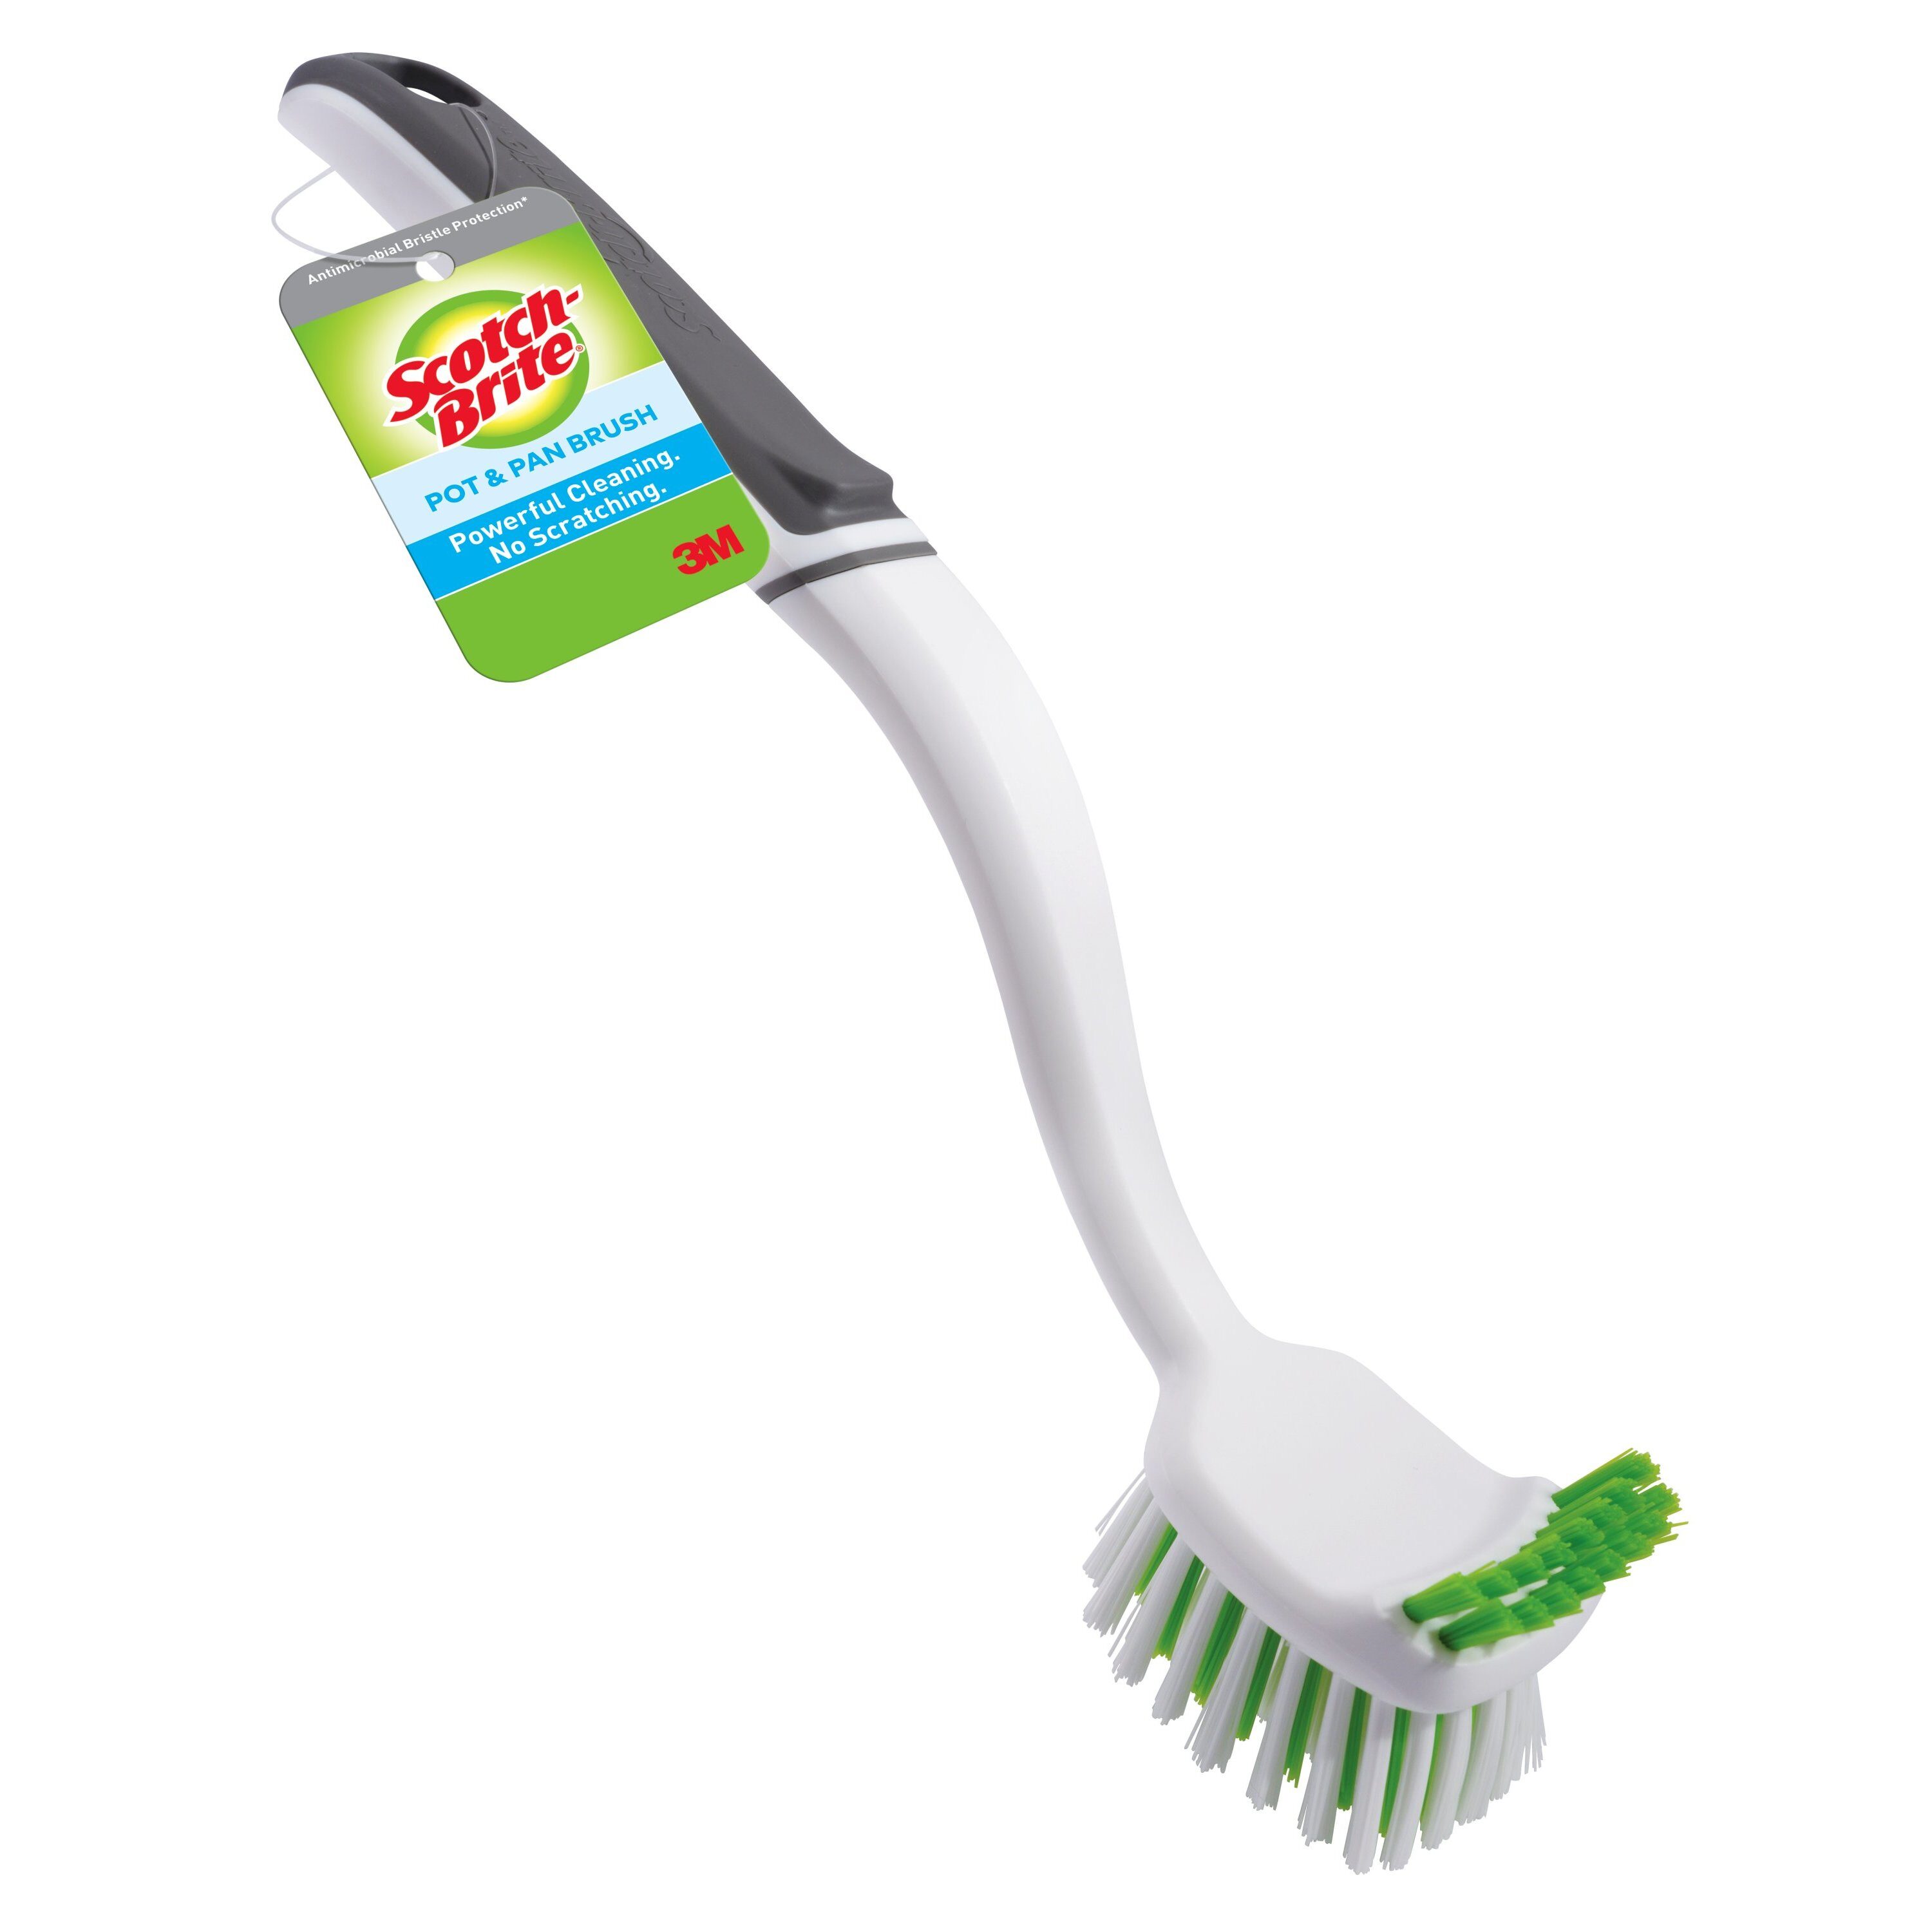 Libman Pot and Pan Scrubbing Dish Wand Scrub Brush Bundle with Curved Kitchen Brush and Two Sponge Refills